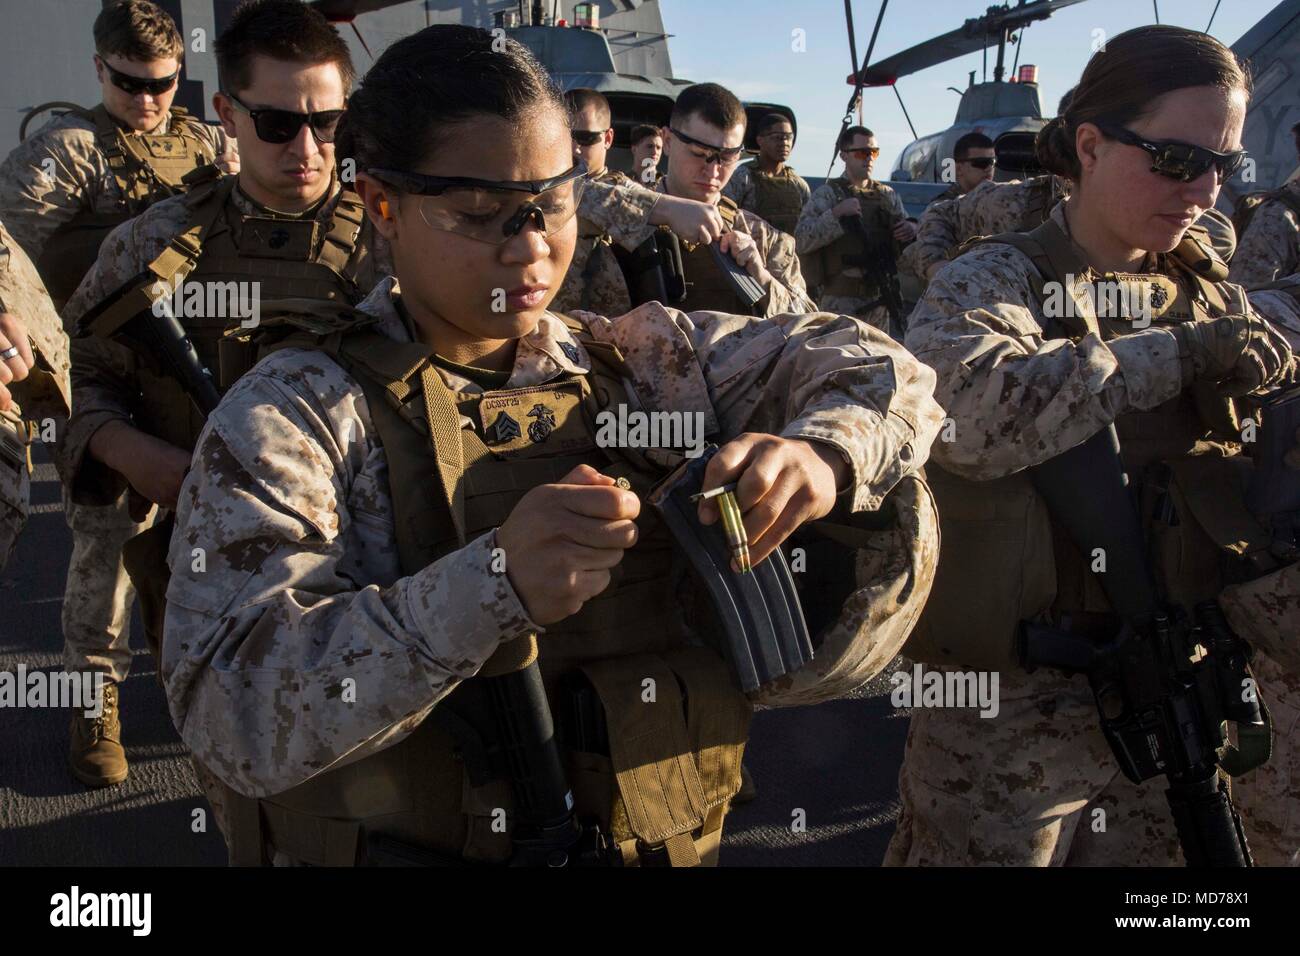 MEDITERRANEAN SEA (March 30, 2018) Marine Corps Sgt. Daneth Cueto, an embark specialist assigned to Combat Logistics Battalion 26, 26th Marine Expeditionary Unit (MEU) loads 5.56mm ammunition into a magazine during a deck shoot aboard San Antonio-class amphibious transport dock USS New York (LPD 21) March 30, 2018. The MEU maintains a constant state of readiness by doing routine weapons familiarization and deck shoots while deployed to U.S. 6th Fleet area of operations. U.S. 6th Fleet, headquartered in Naples, Italy, conducts the full spectrum of joint and naval operations, often in concert wi Stock Photo